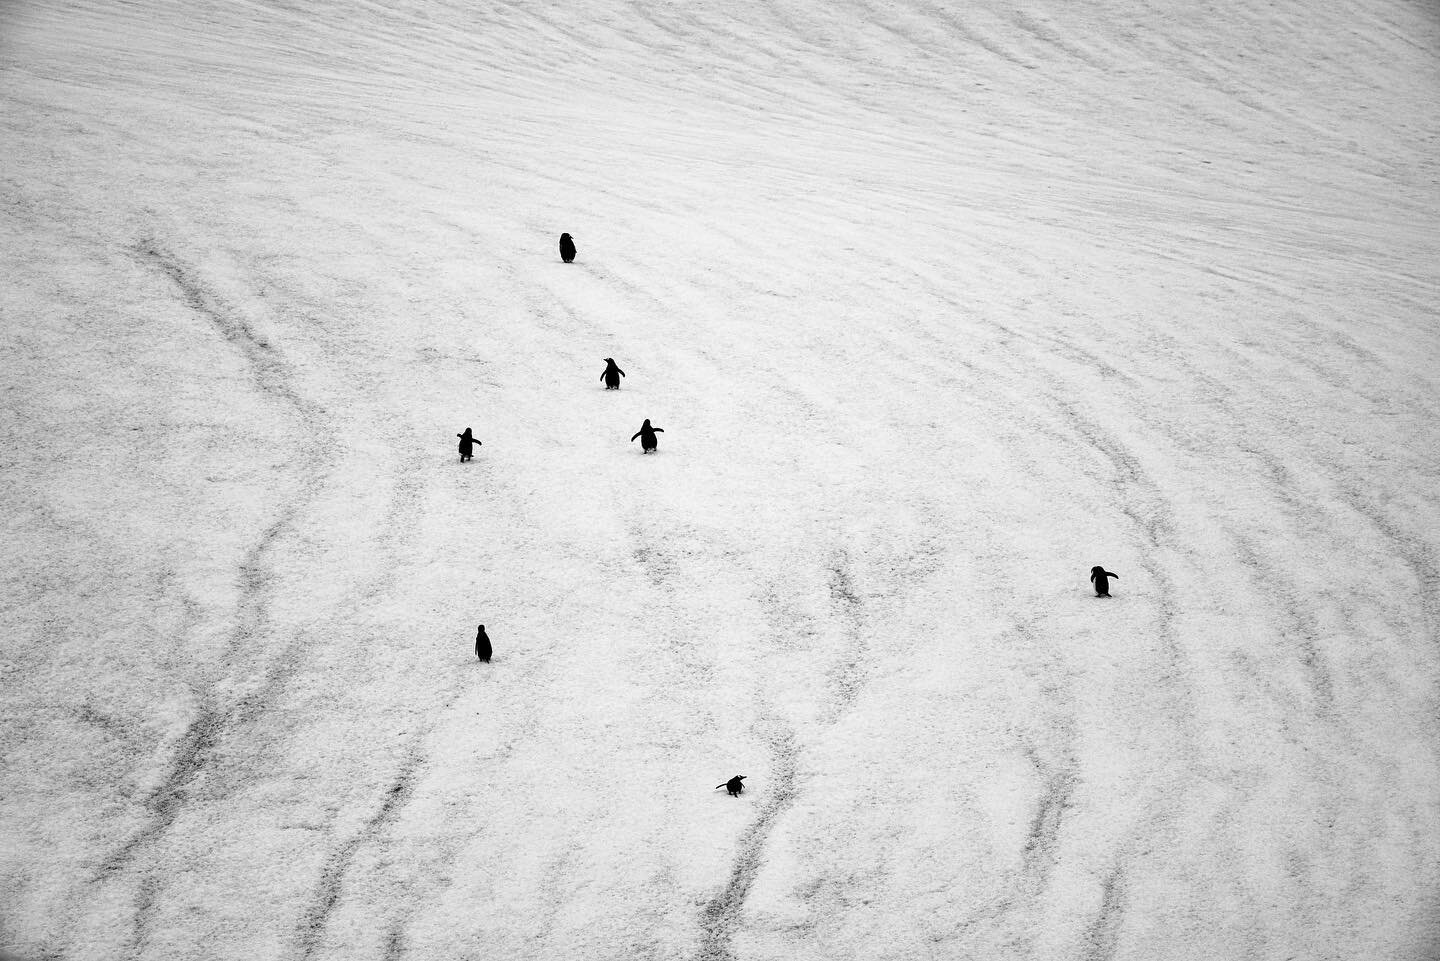 Hi Ho, Hi Ho&hellip;.!
Immense pleasure watching these Adele penguins making their way up-hill. They are so persistent and single- minded and reminded me of the seven dwarves on their way home from work!
Antarctica February 2023
#penguins #blackandwh